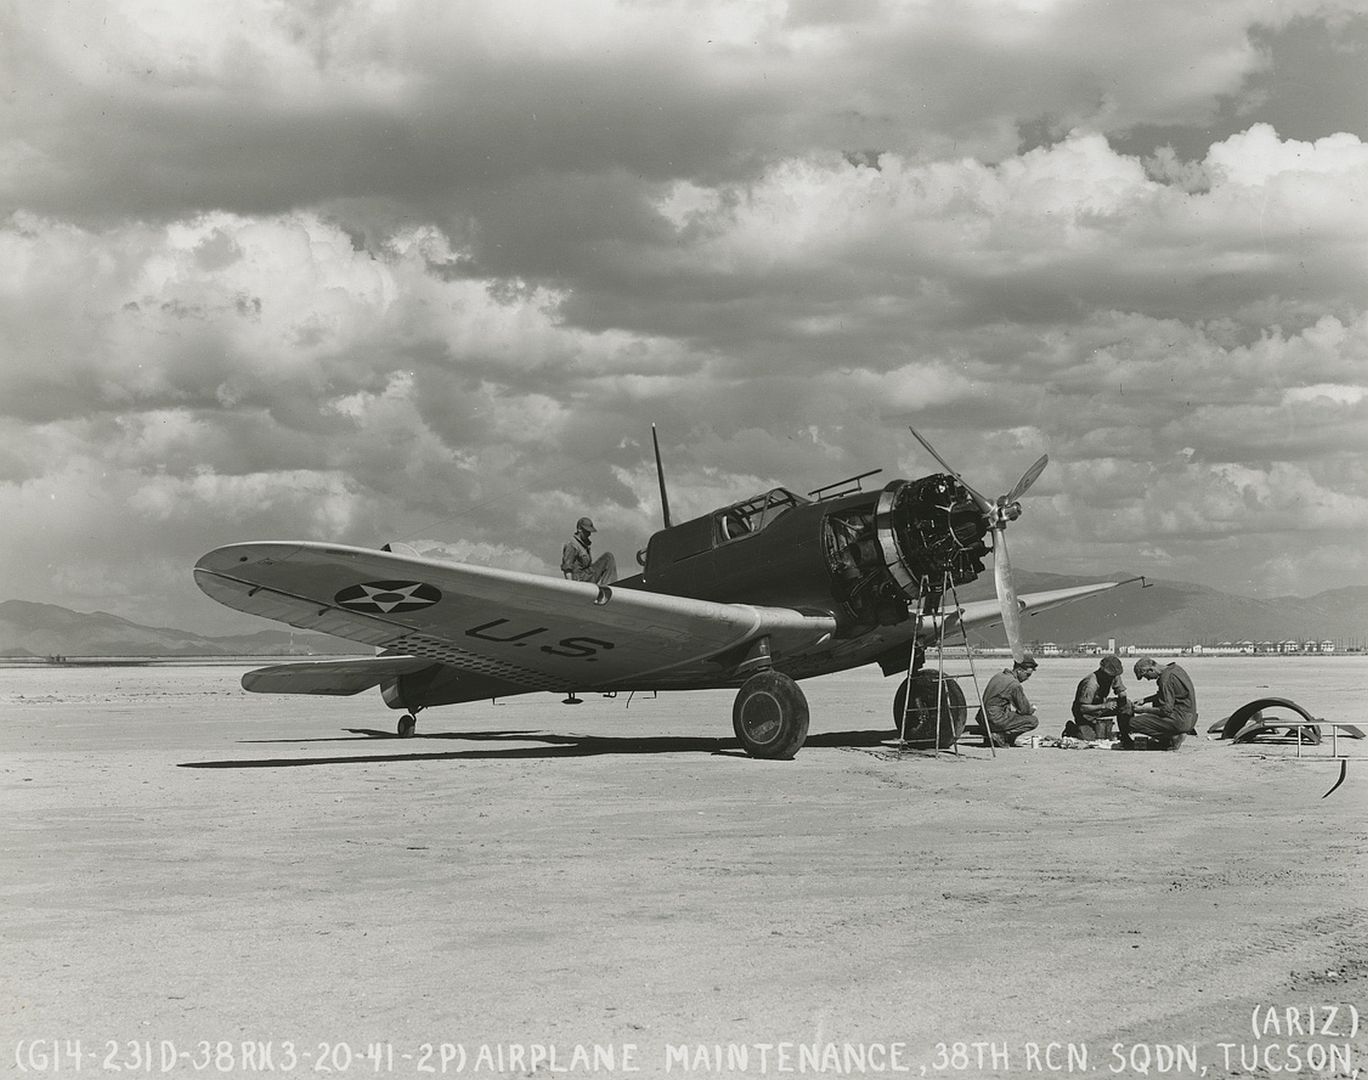 17 Nomad Aircraft Undergoing Maintenance At An Airfield In Near Tucson Arizona March 20 1941